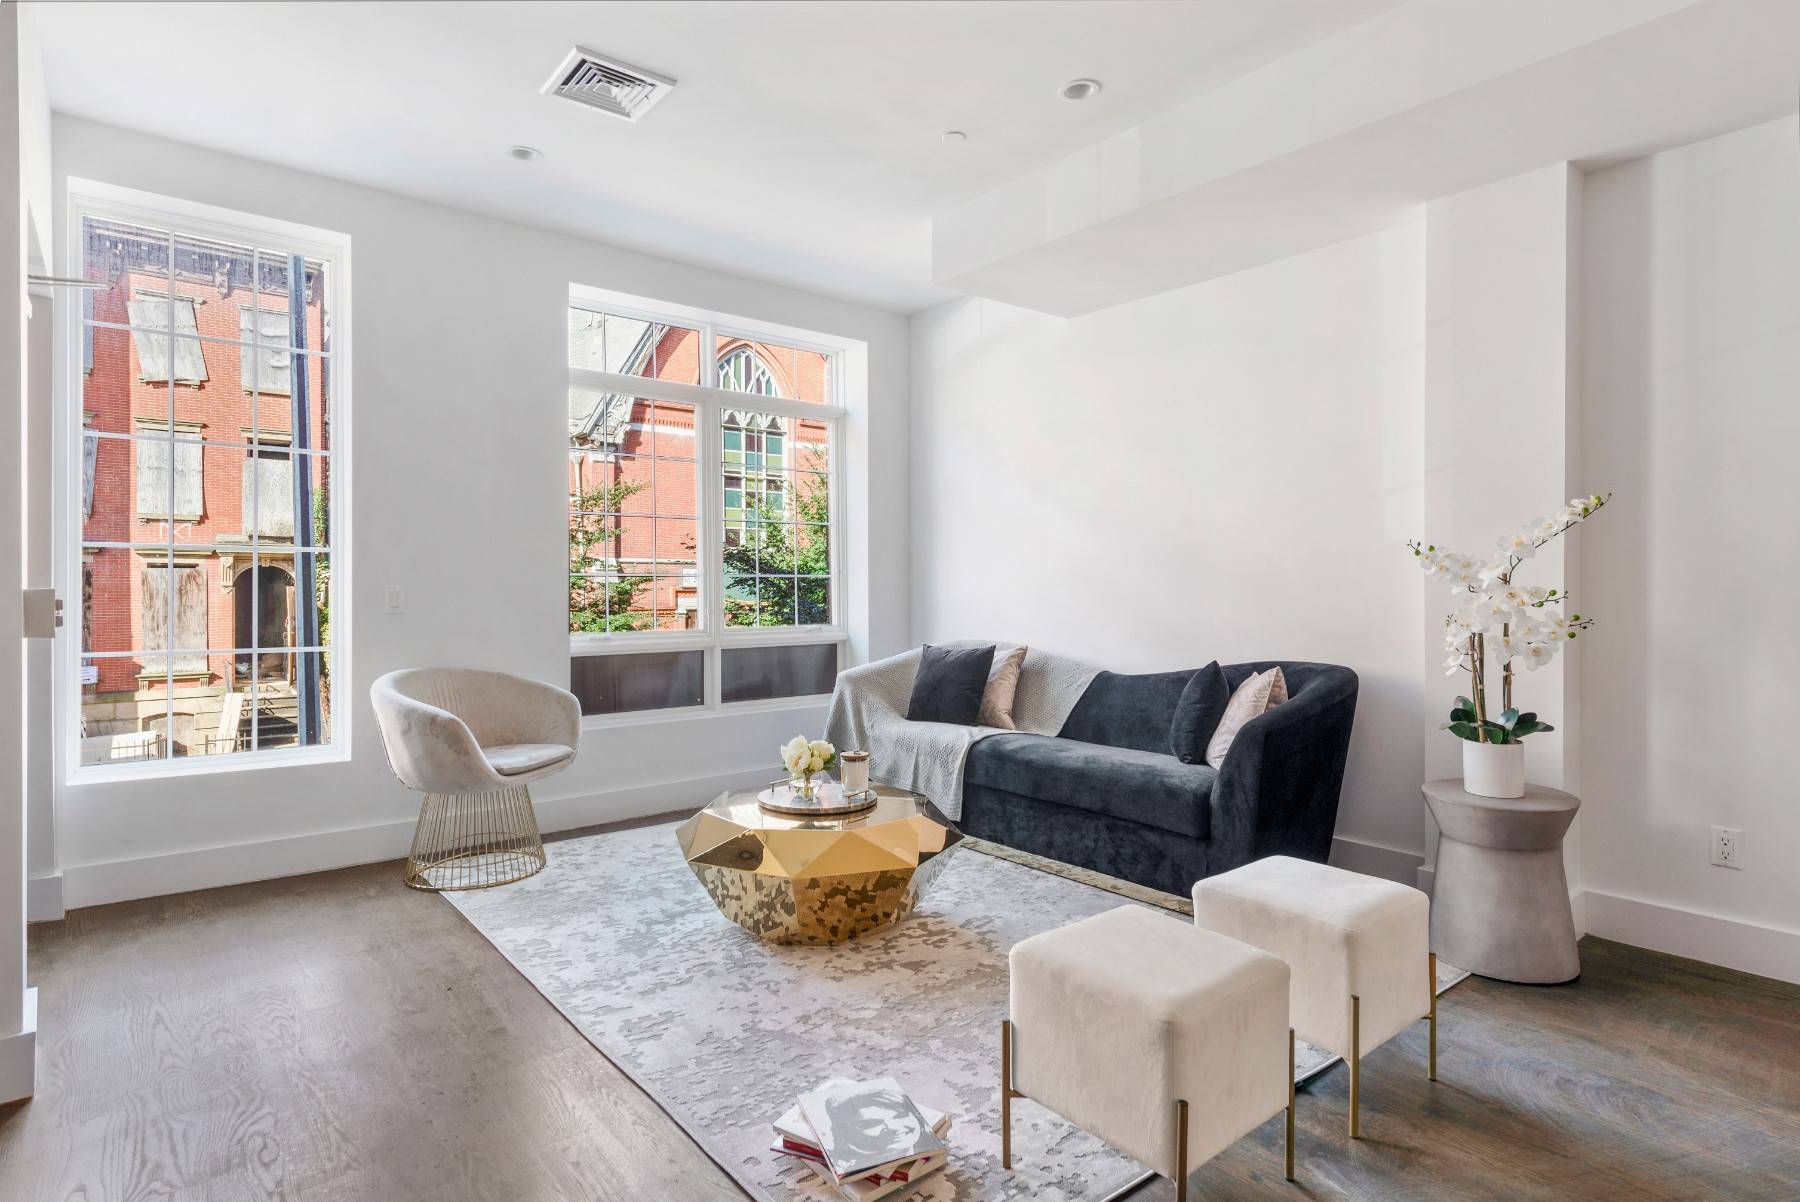 335 341 NOSTRAND OFFERS 15 YEAR TAX ABATEMENTLuxury living in trendy, up and coming Brooklyn !